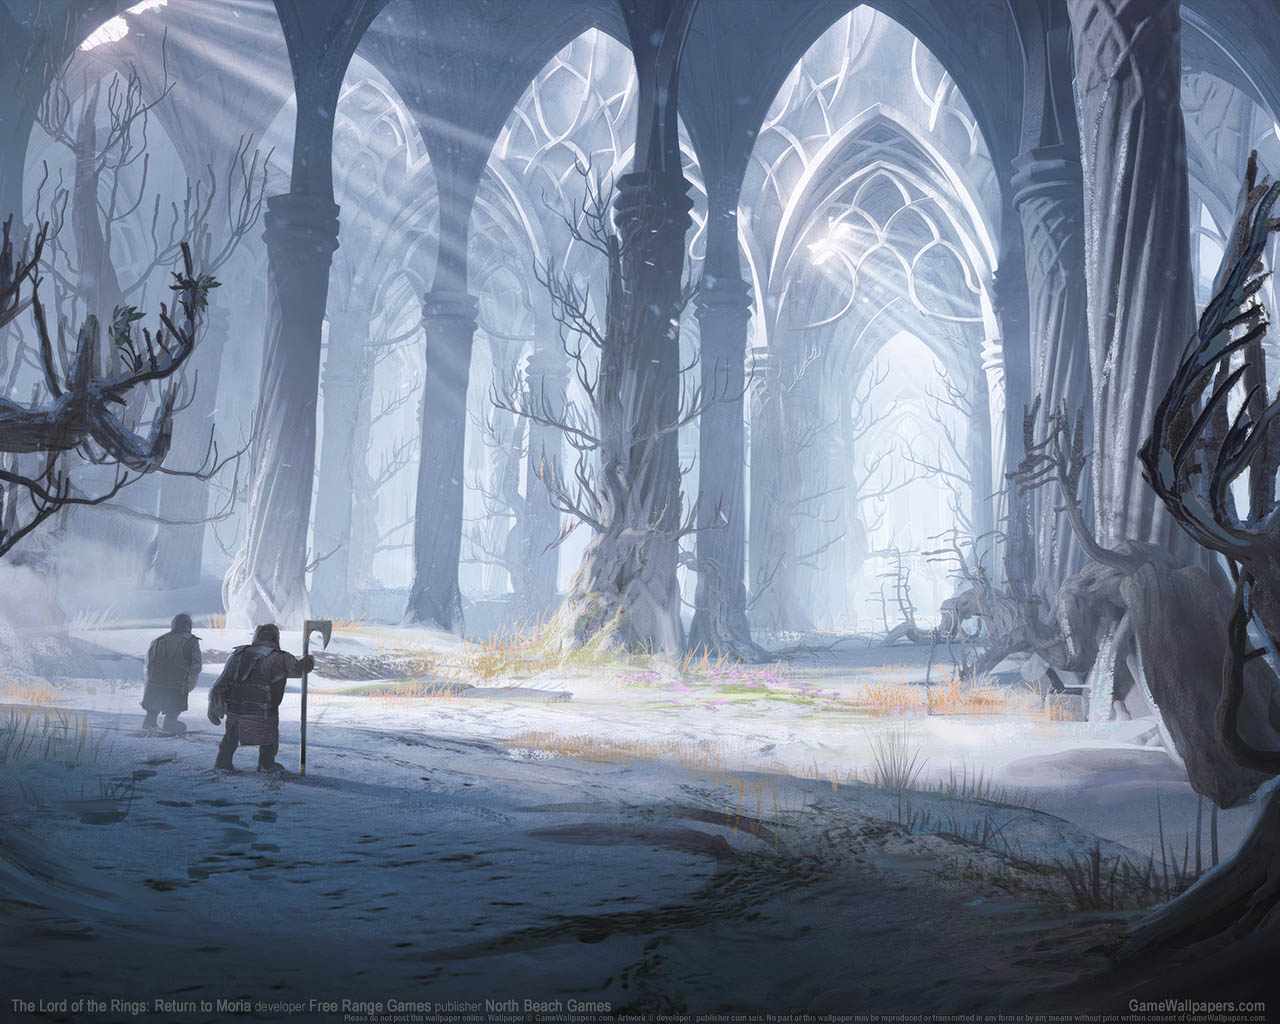 The Lord of the Rings: Return to Moria fond d'cran 06 1280x1024